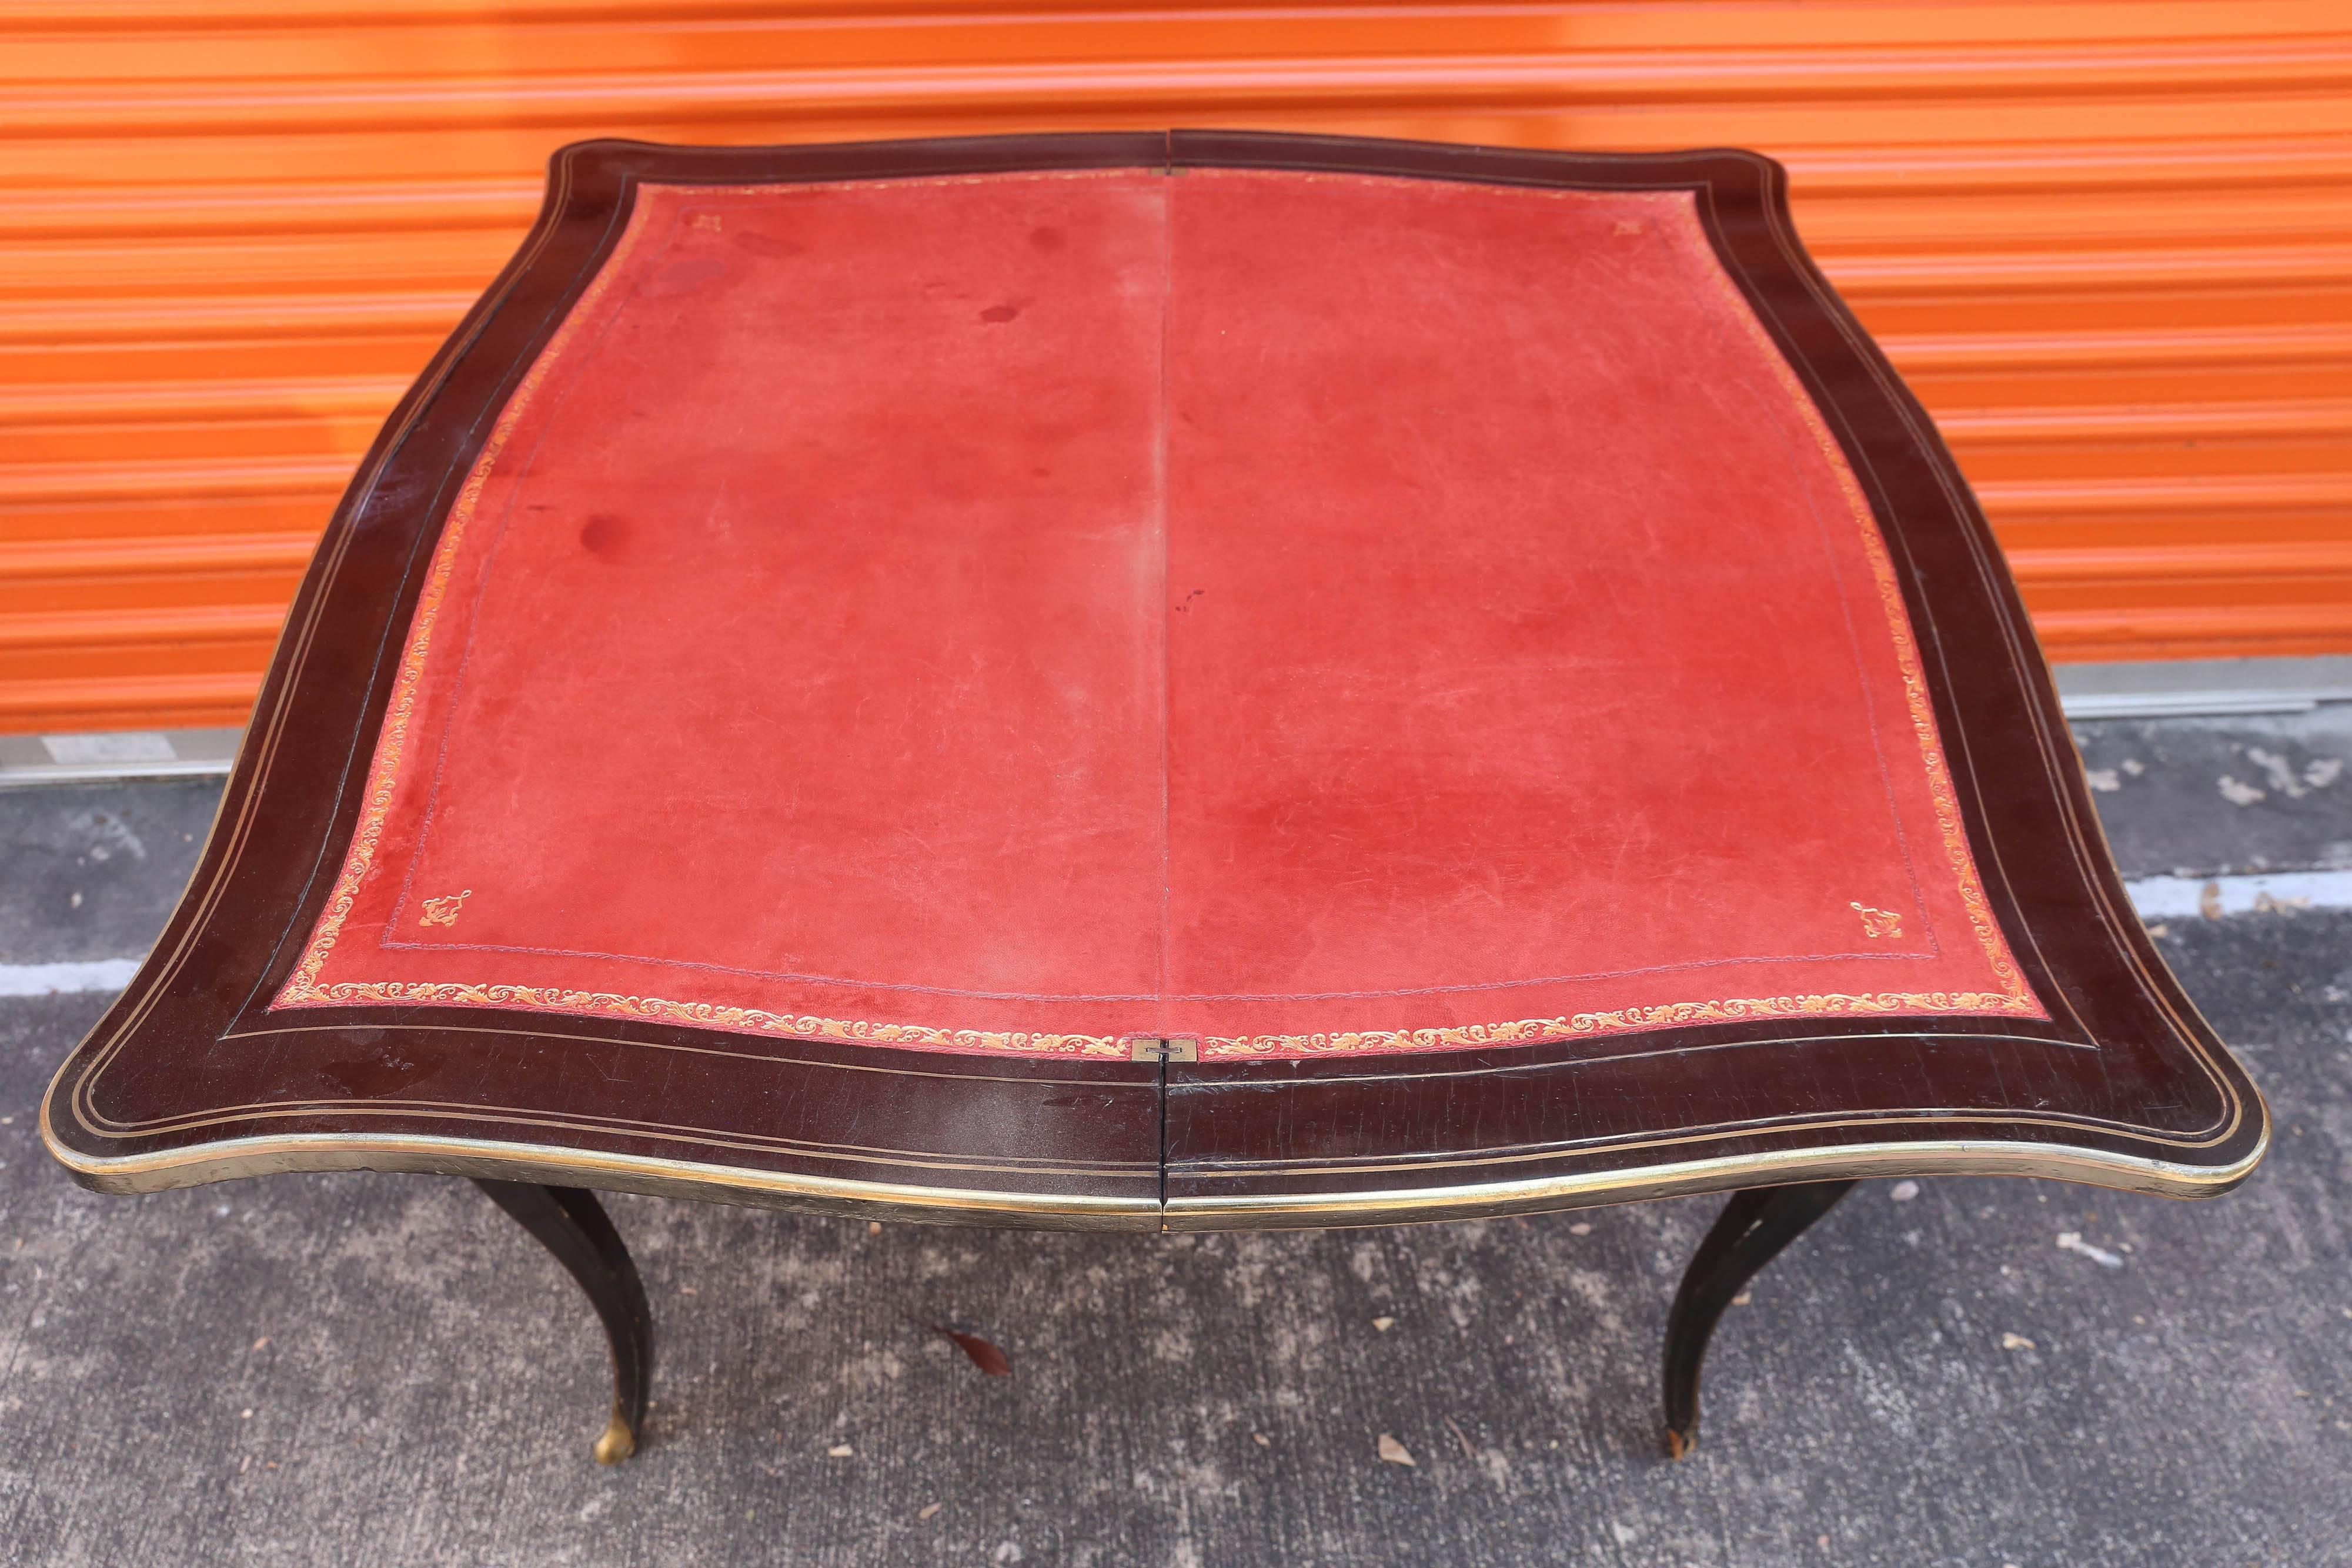 Hand-Painted Antique French Game Table with Interior Compartment, Leather Inset & Gilt Detail